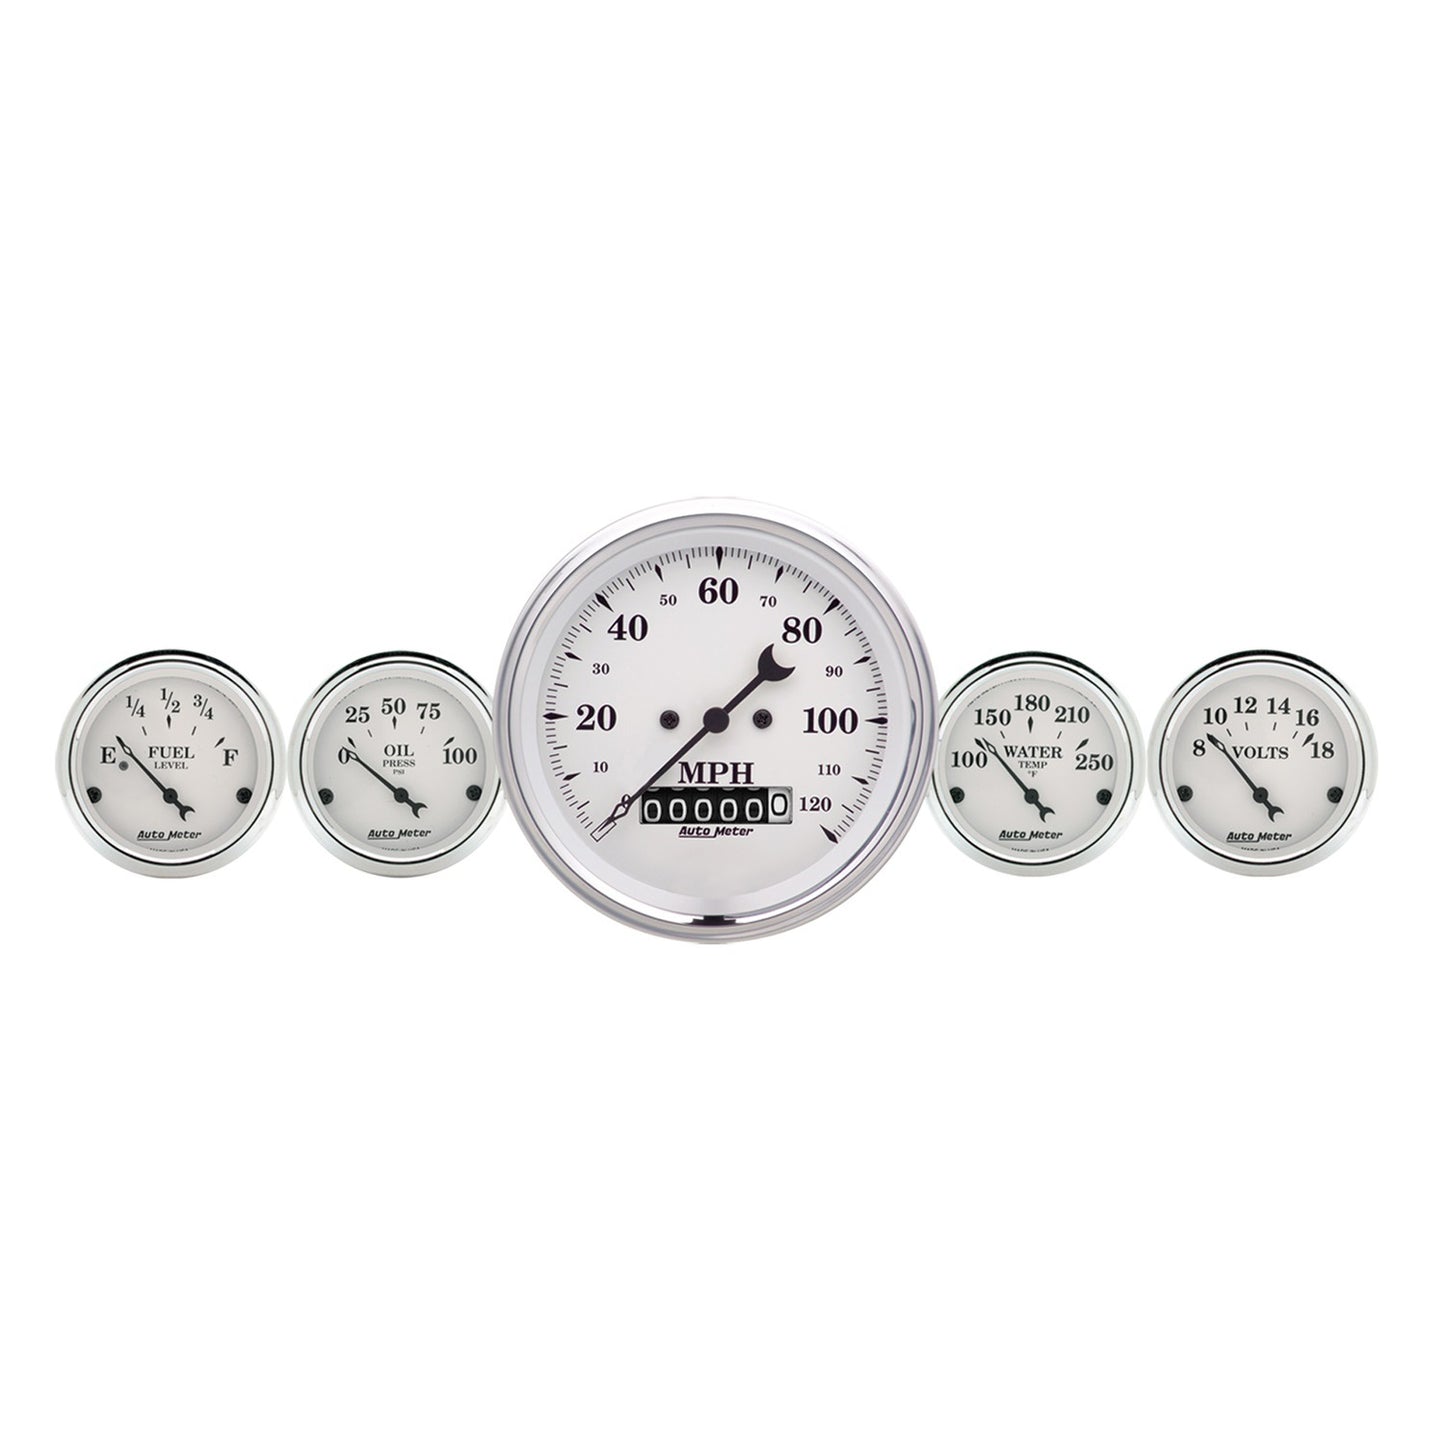 AutoMeter 5 PC. GAUGE KIT 3-3/8 in. & 2-1/16 in. ELEC. SPEEDOMETER OLD TYME WHITE 1640